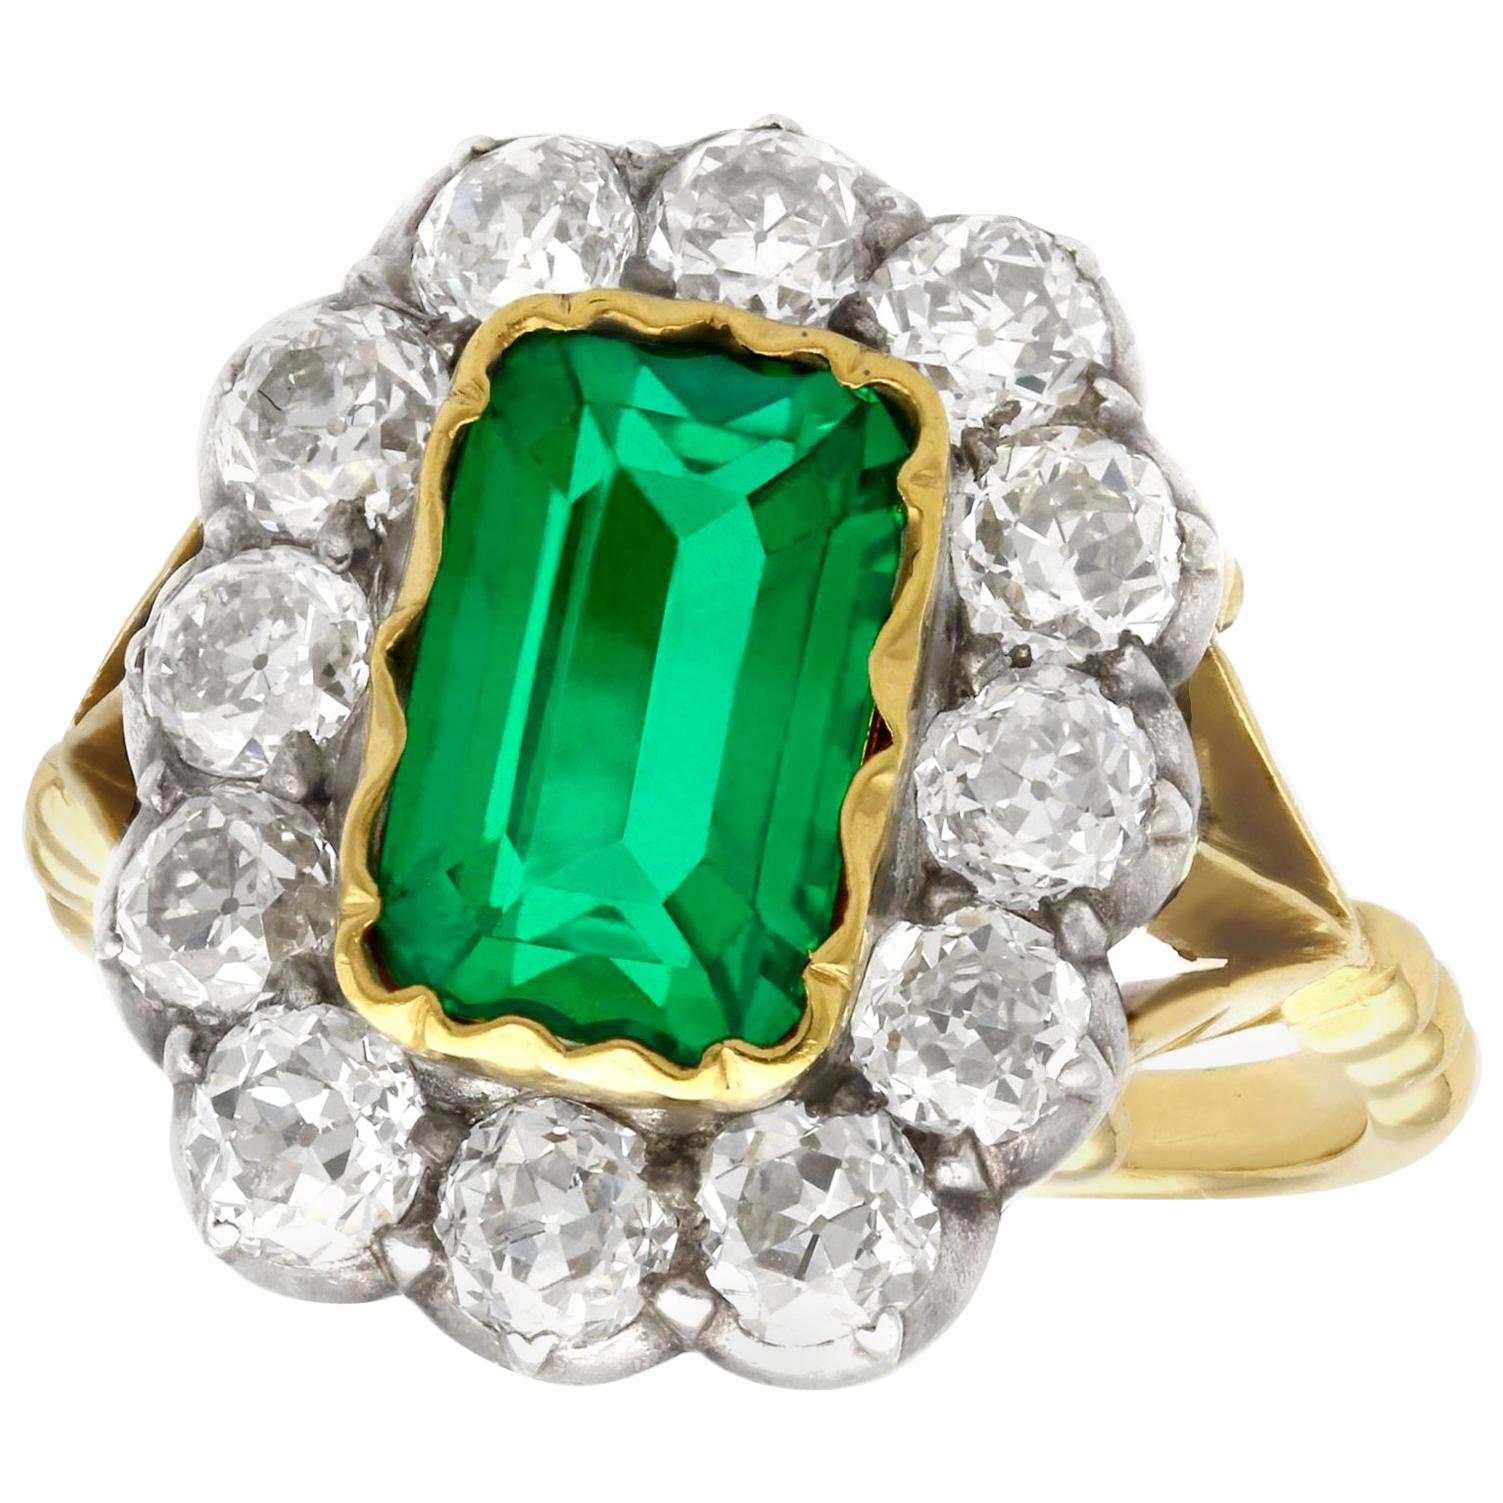 Antique 2 Carat Colombian Emerald & 2.2 Carat Diamond Yellow Gold Cocktail Ring